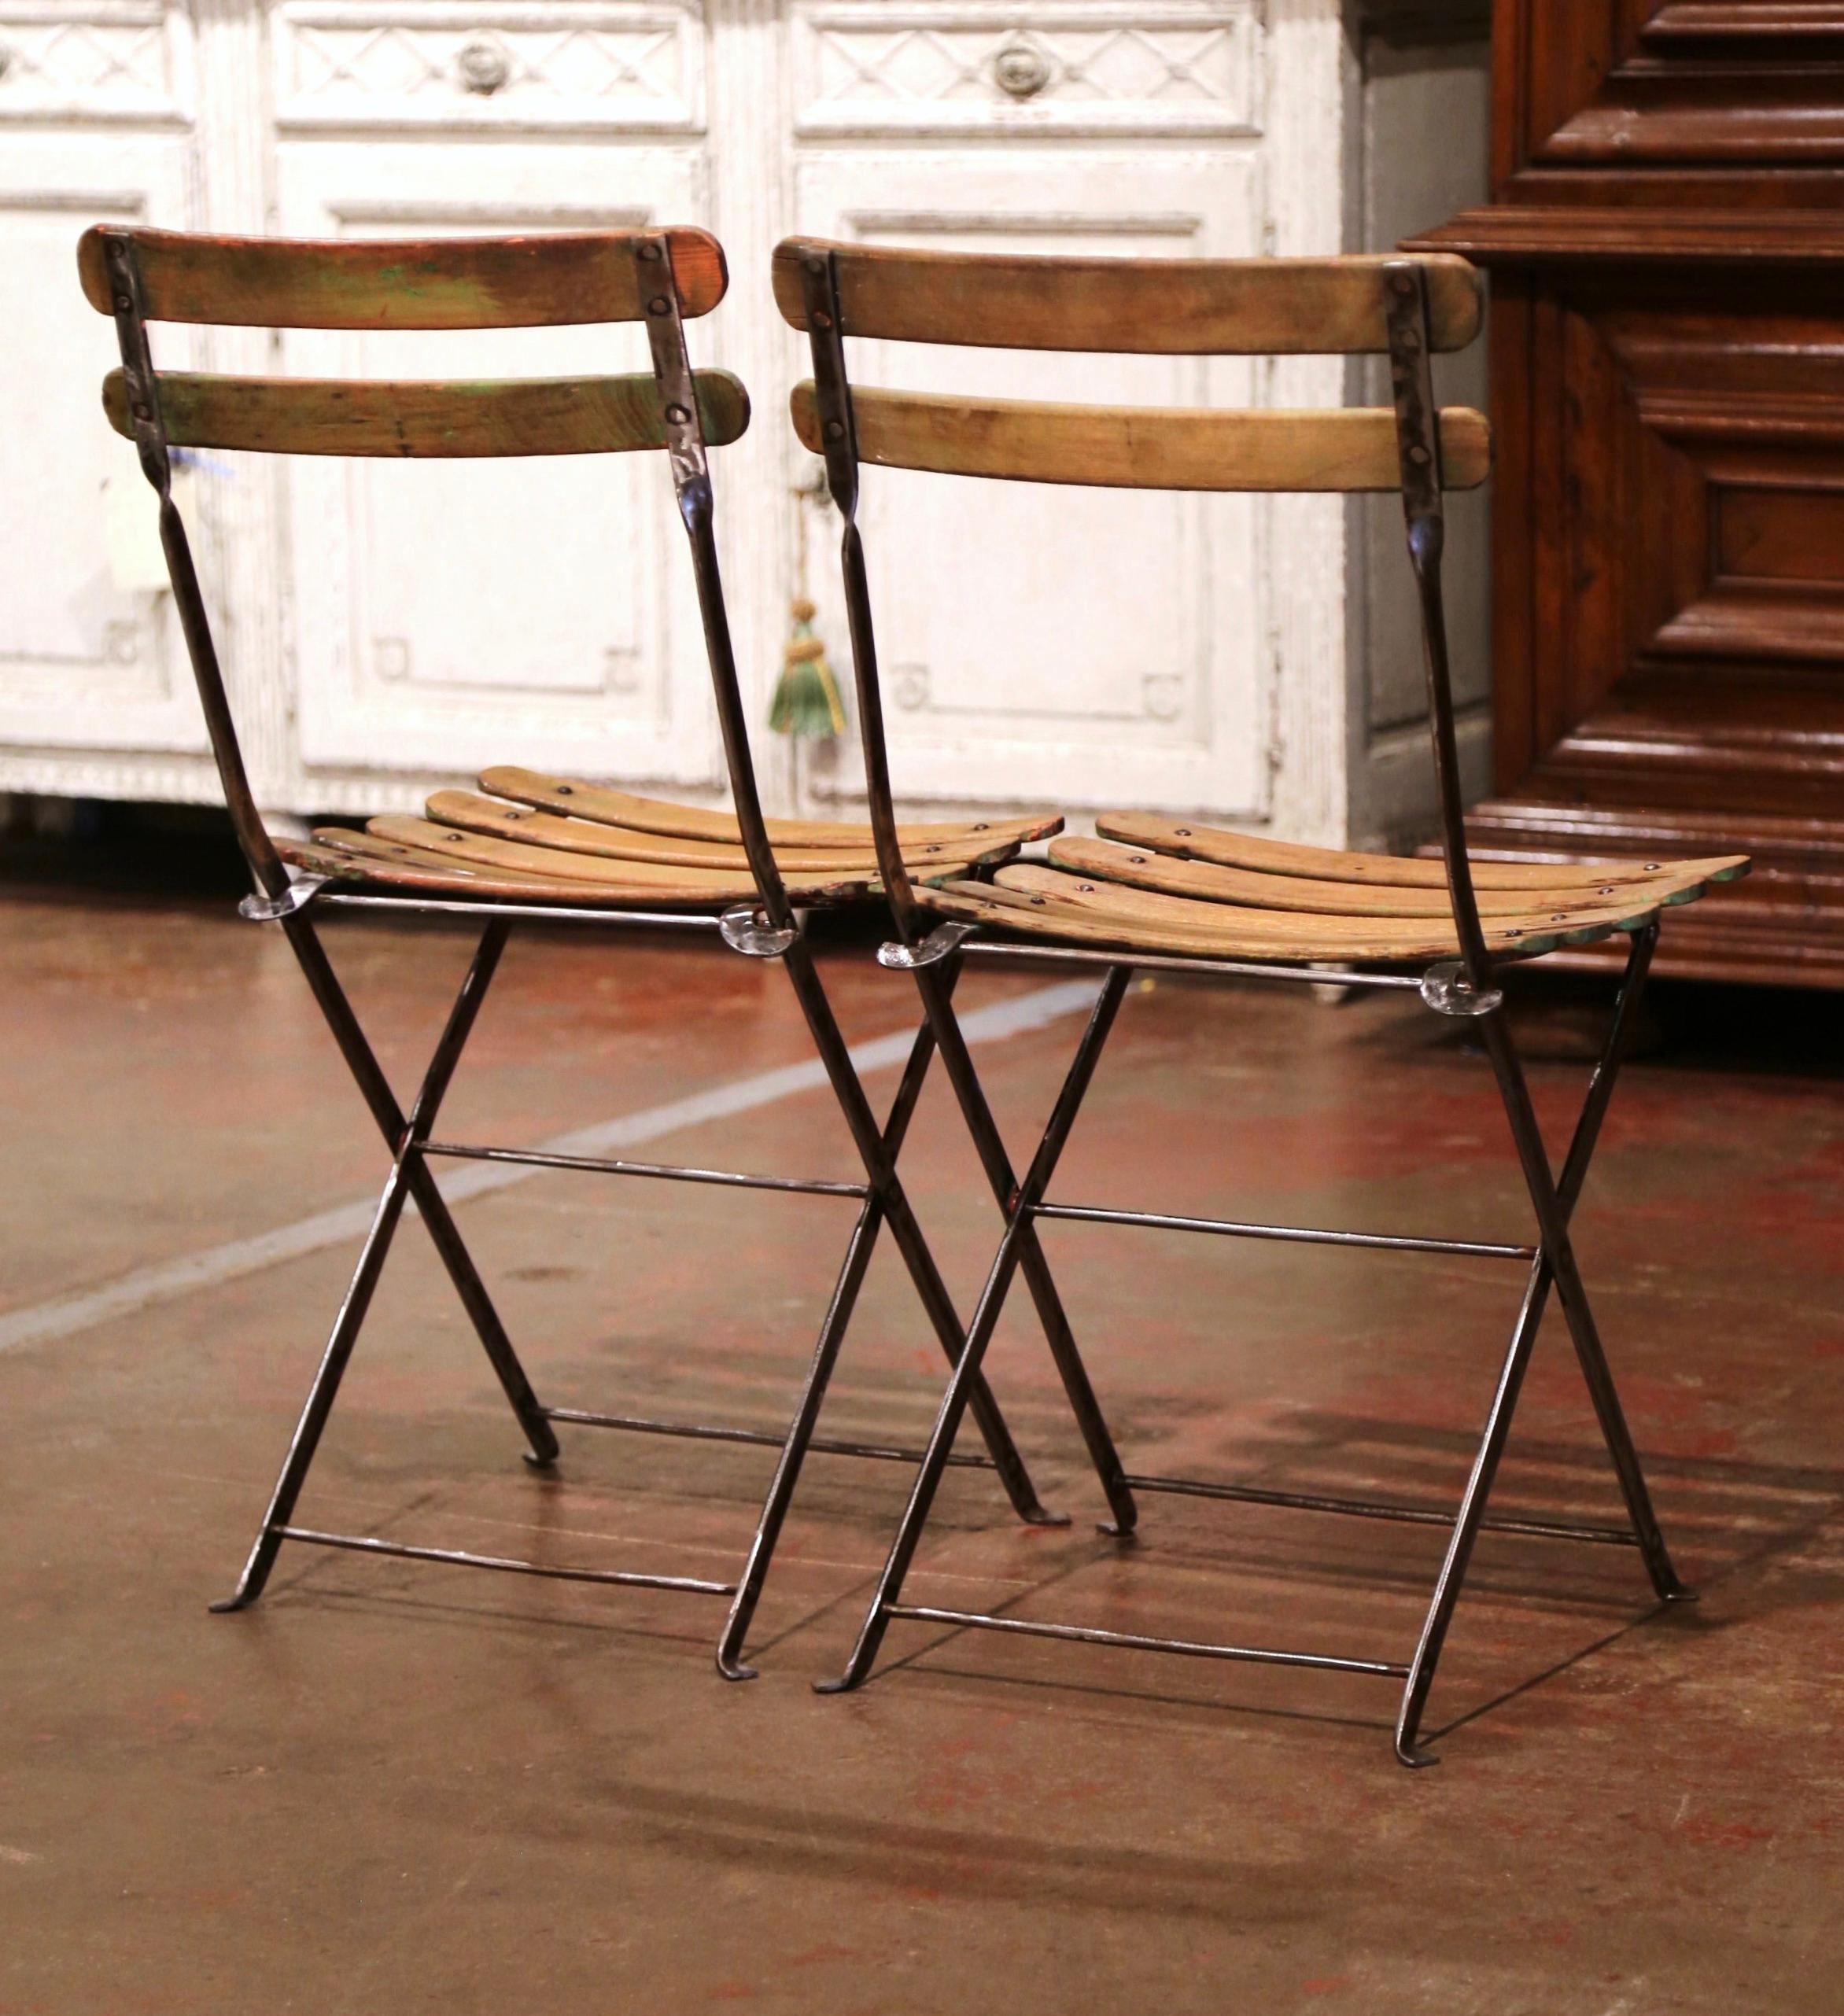 Pair of Early 20th Century French Polished Iron and Wood Folding Garden Chairs 6